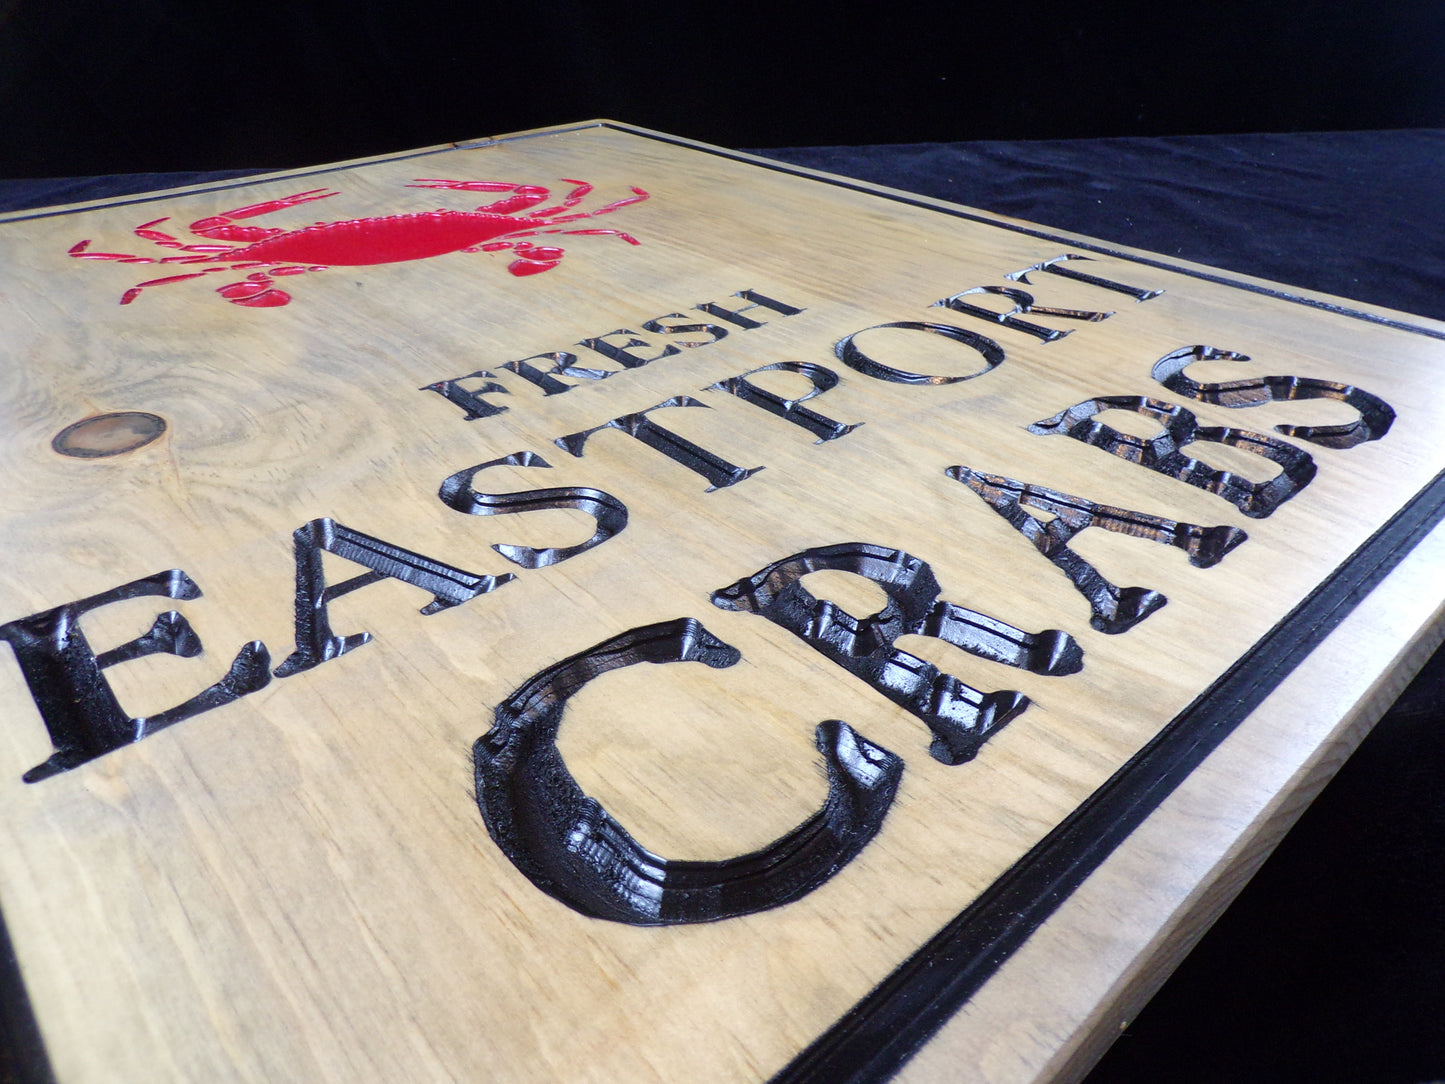 "Fresh Eastport Crabs" Sign - Ready to Hang